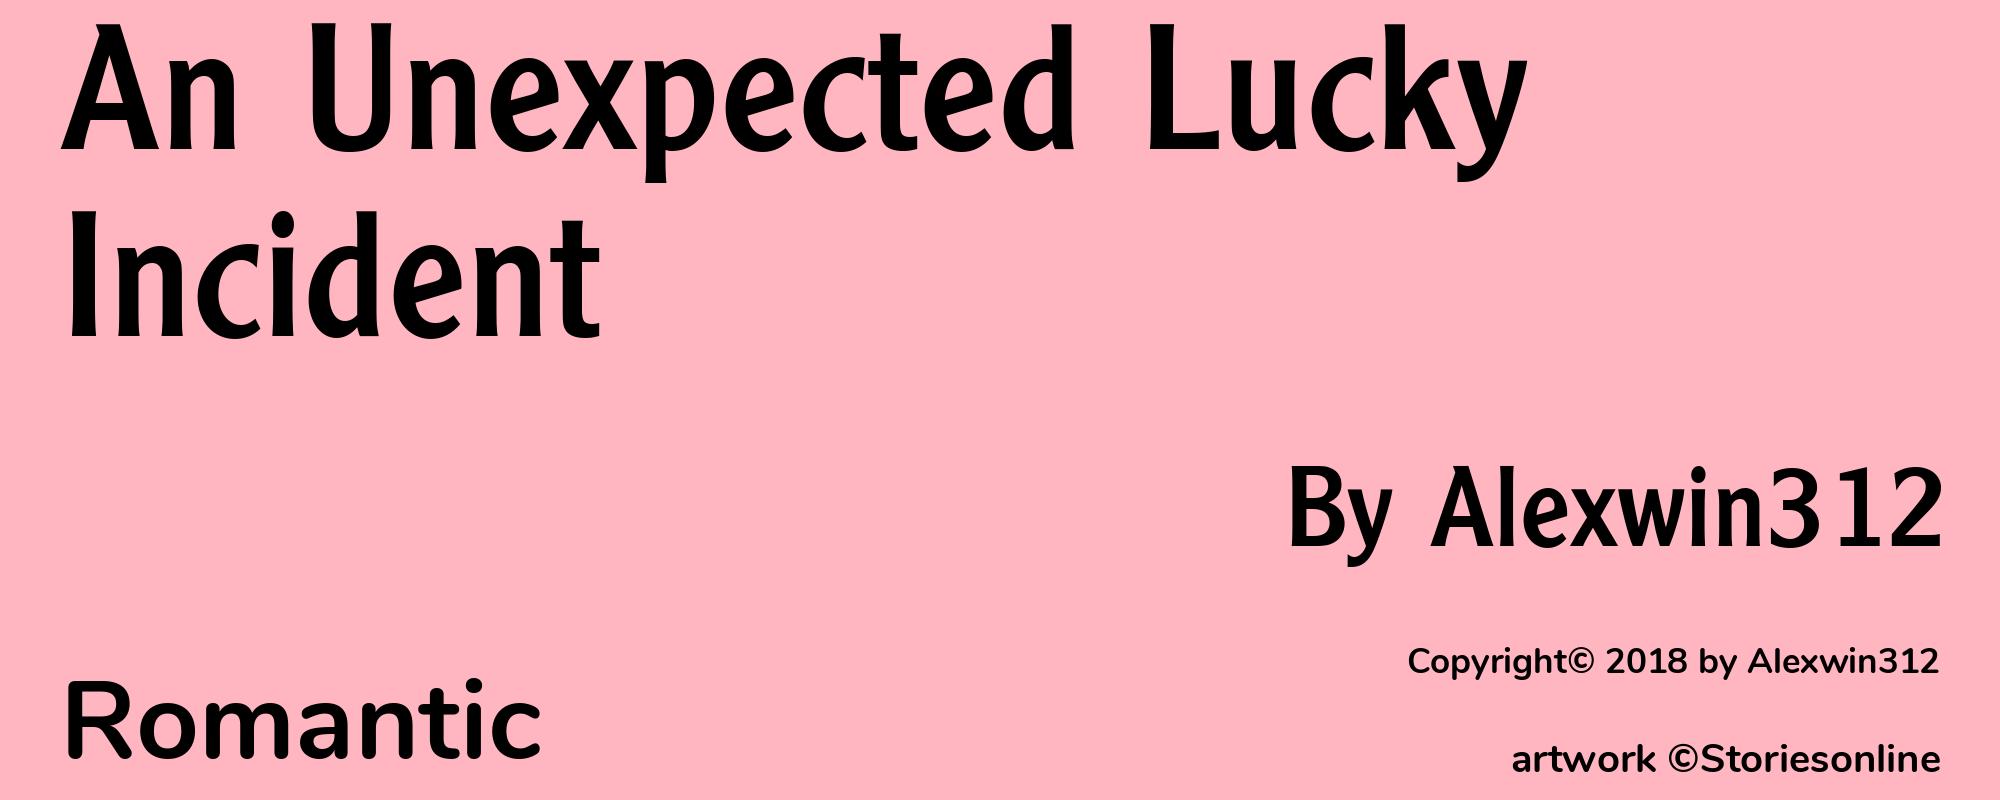 An Unexpected Lucky Incident - Cover